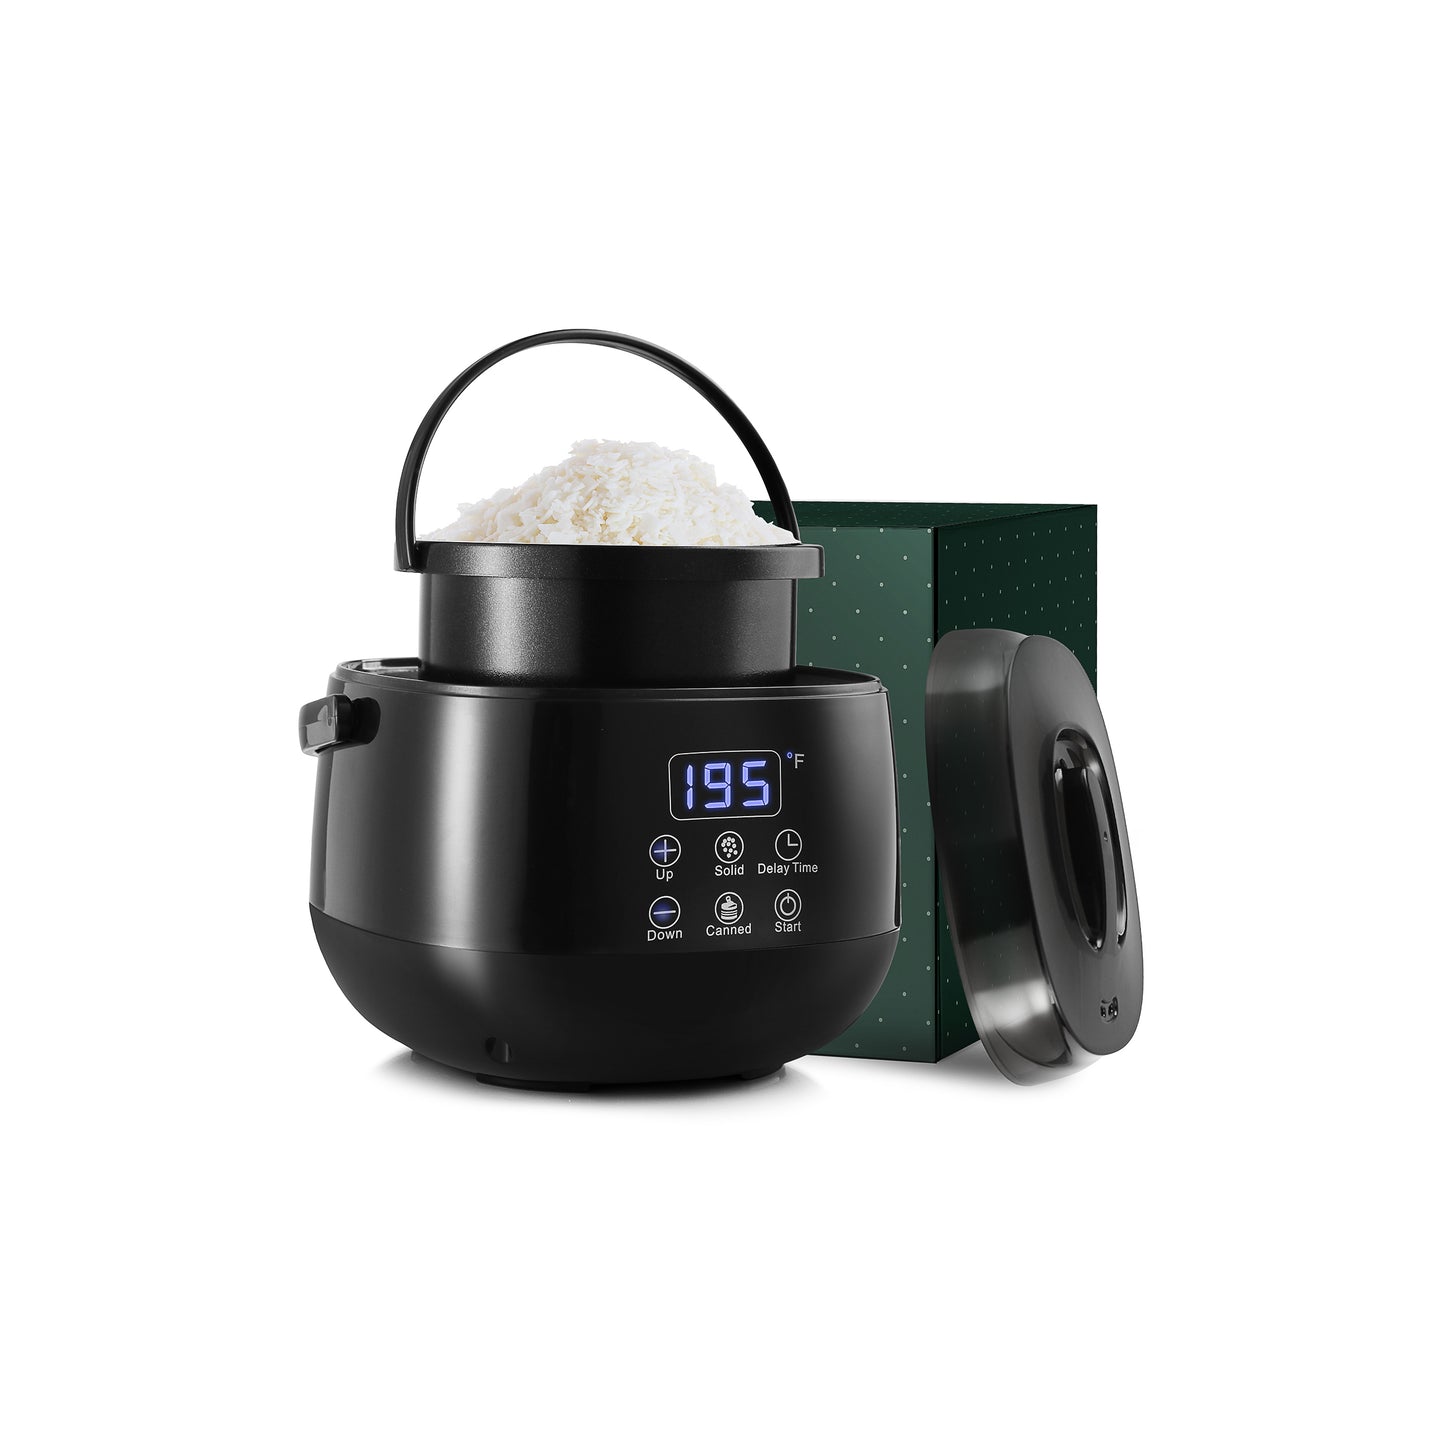 Wax Melting Pot for Candle Making 10litre Electric Wax Heating Melt Pot  Temperature Controlled Wax Melt Candle Business Hobby Crafting 